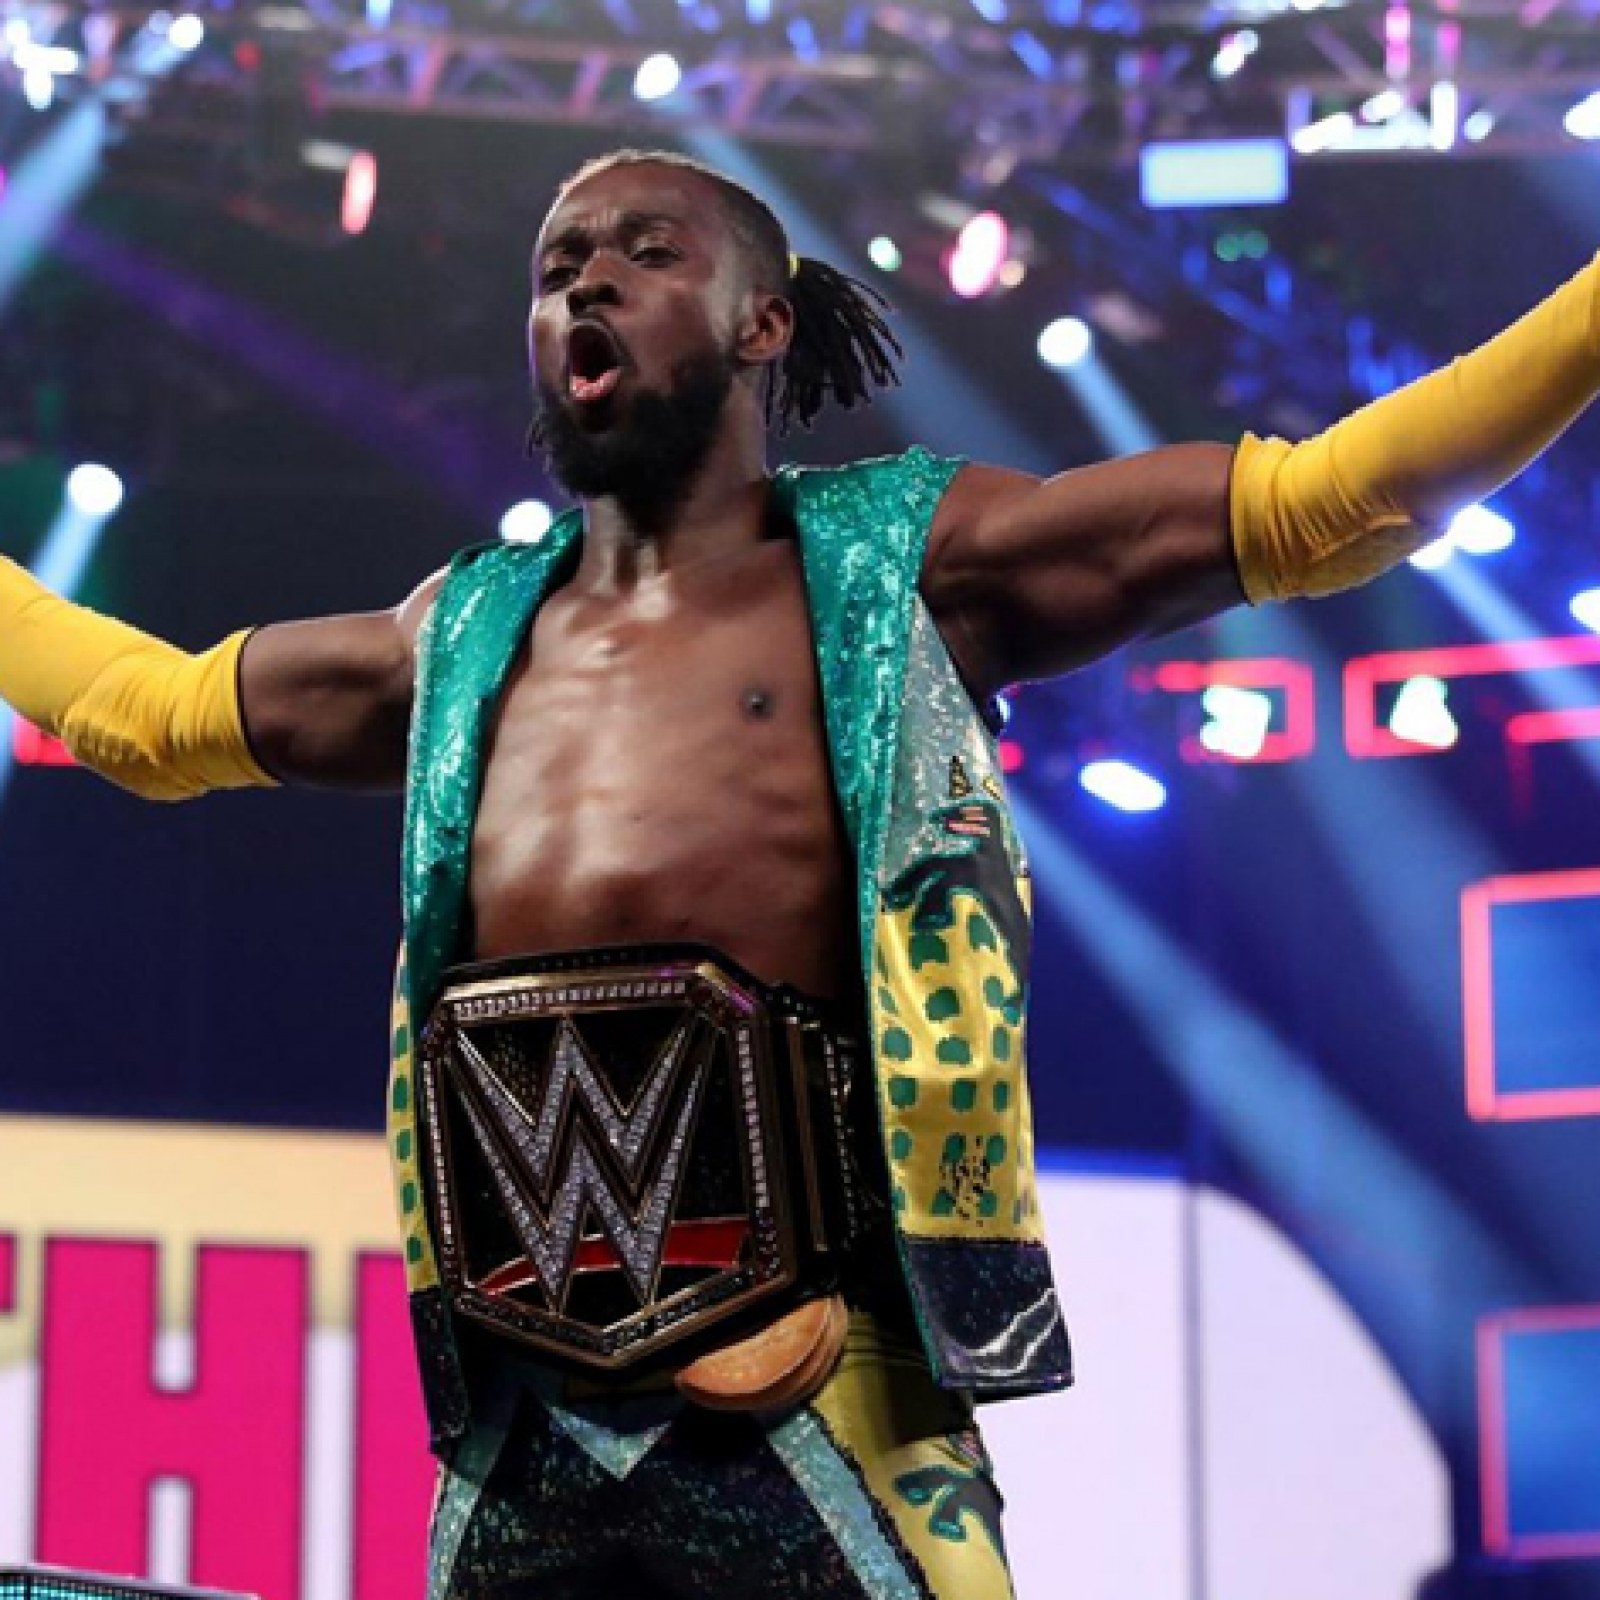 Kofi Kingston claims that his chest was perfect before facing Big Show.